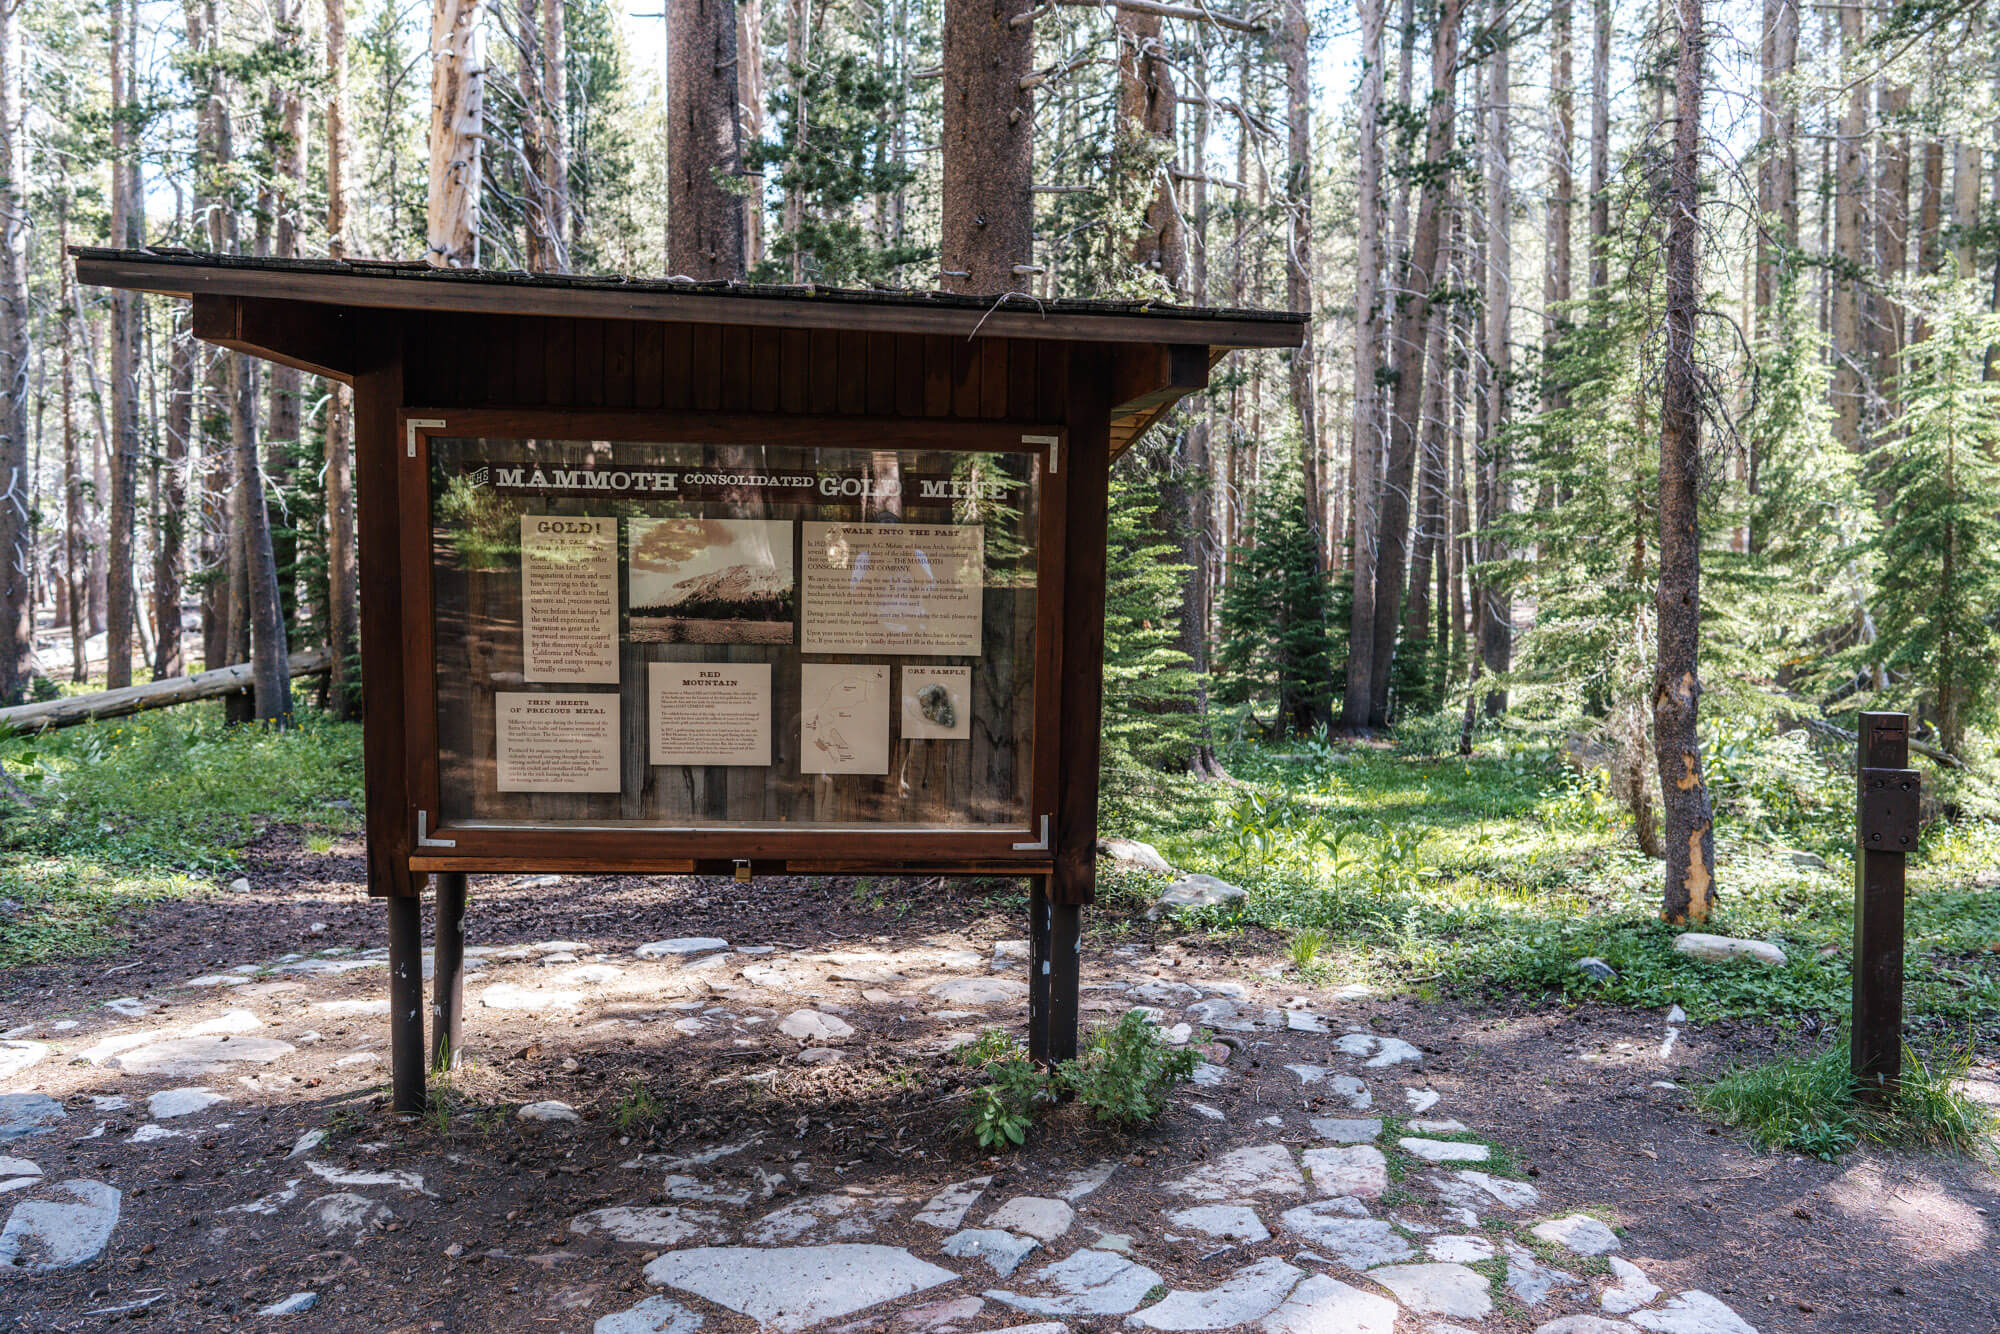 Sign about the Mammoth Consolidated Gold Mine on the Heart Lake trail